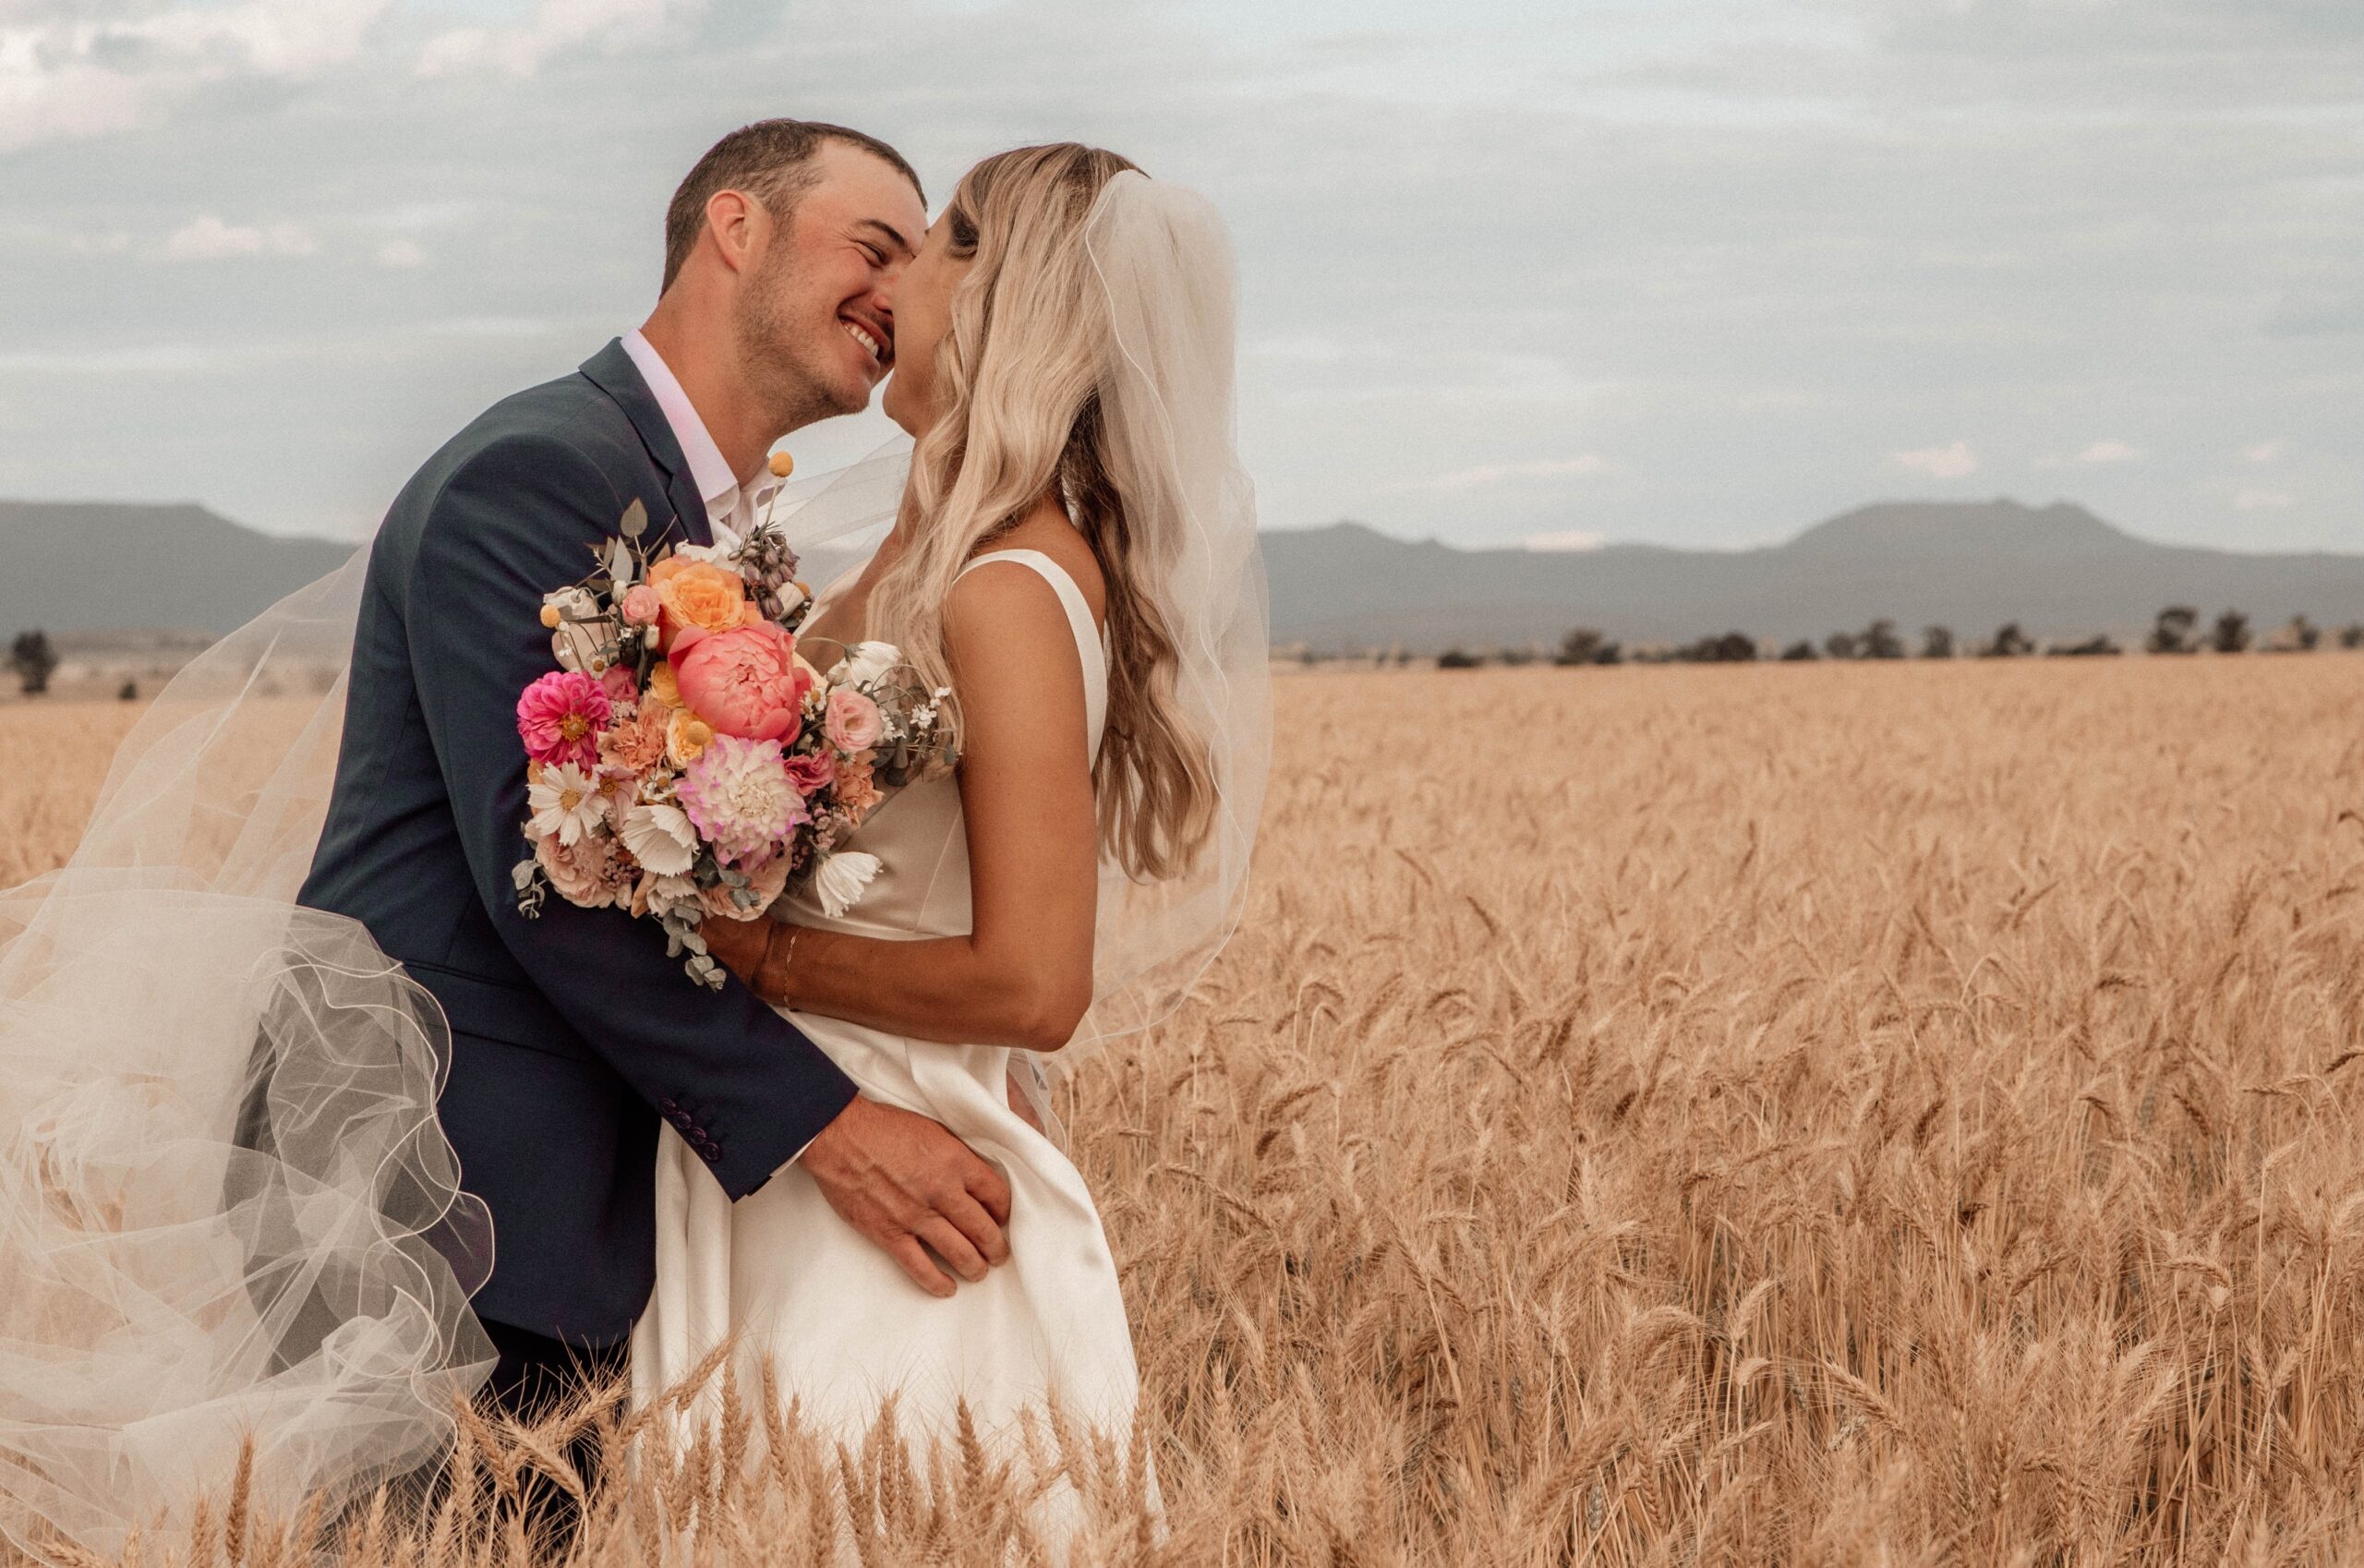 After the floods – a beautiful wedding day for Marlee and Kodie